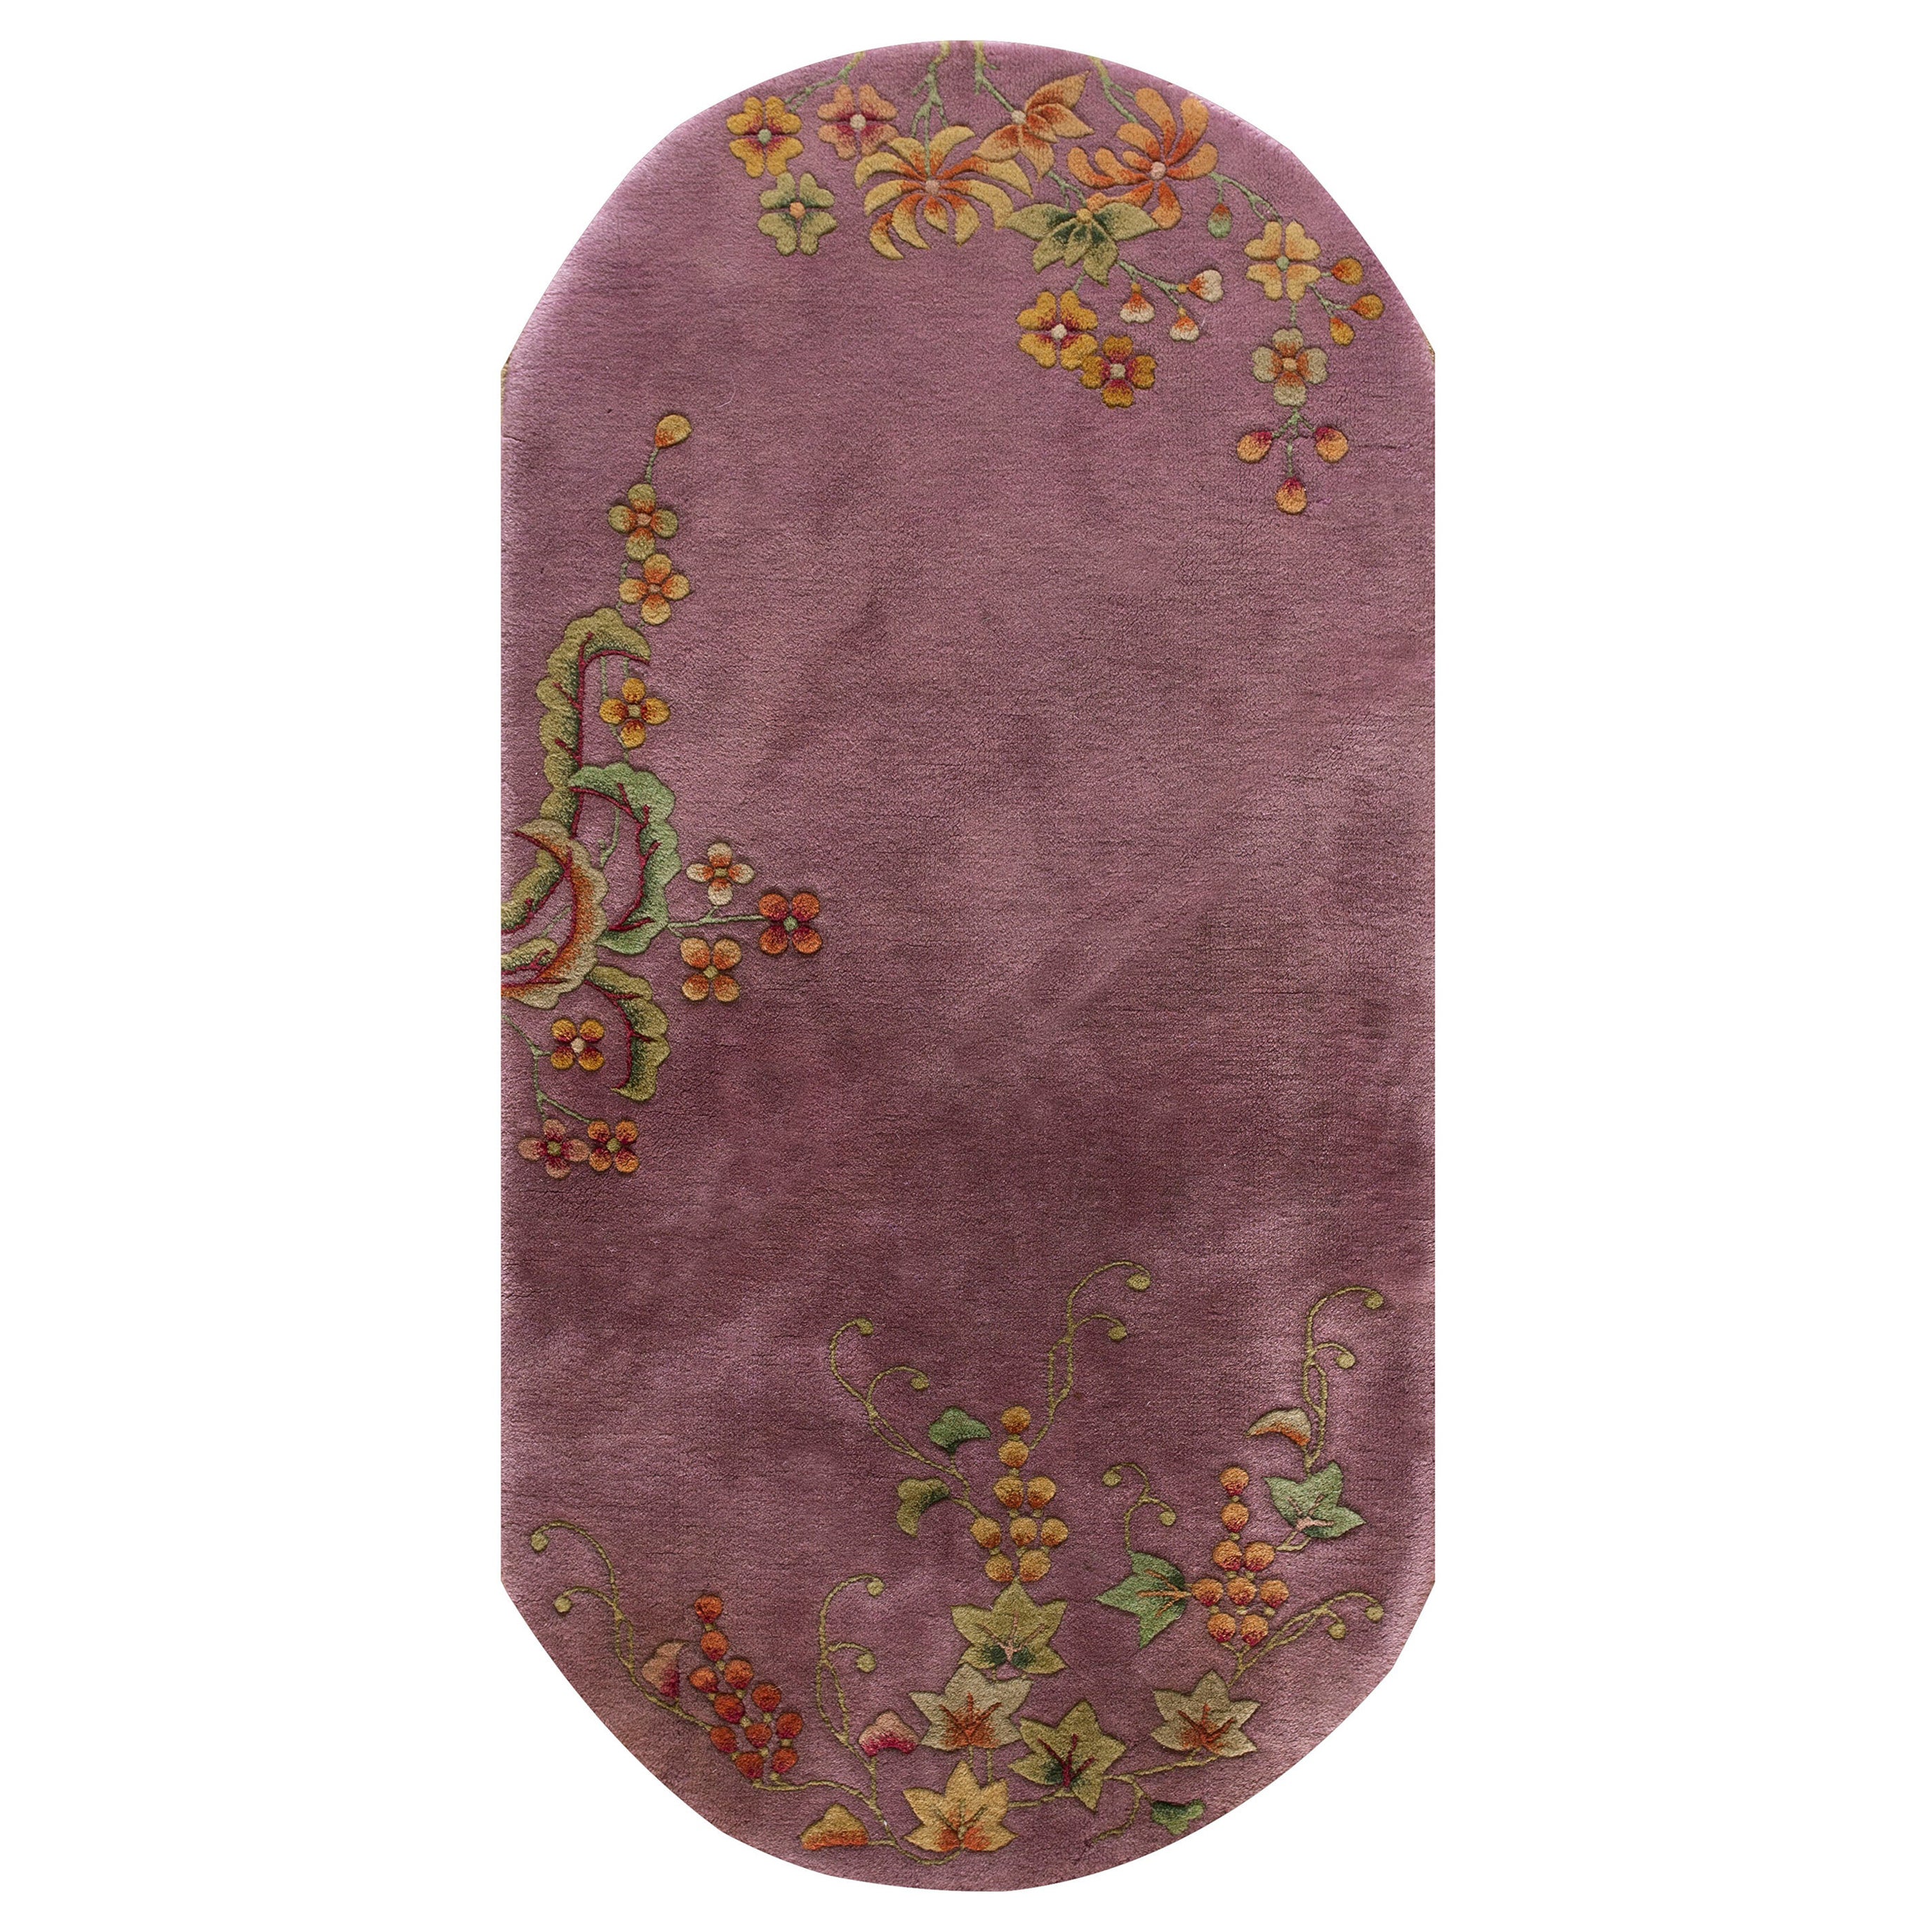 1920s Chinese Oval Art Deco Carpet ( 2' 6'' x 4' 8'' - 76 x 142 cm ) For Sale